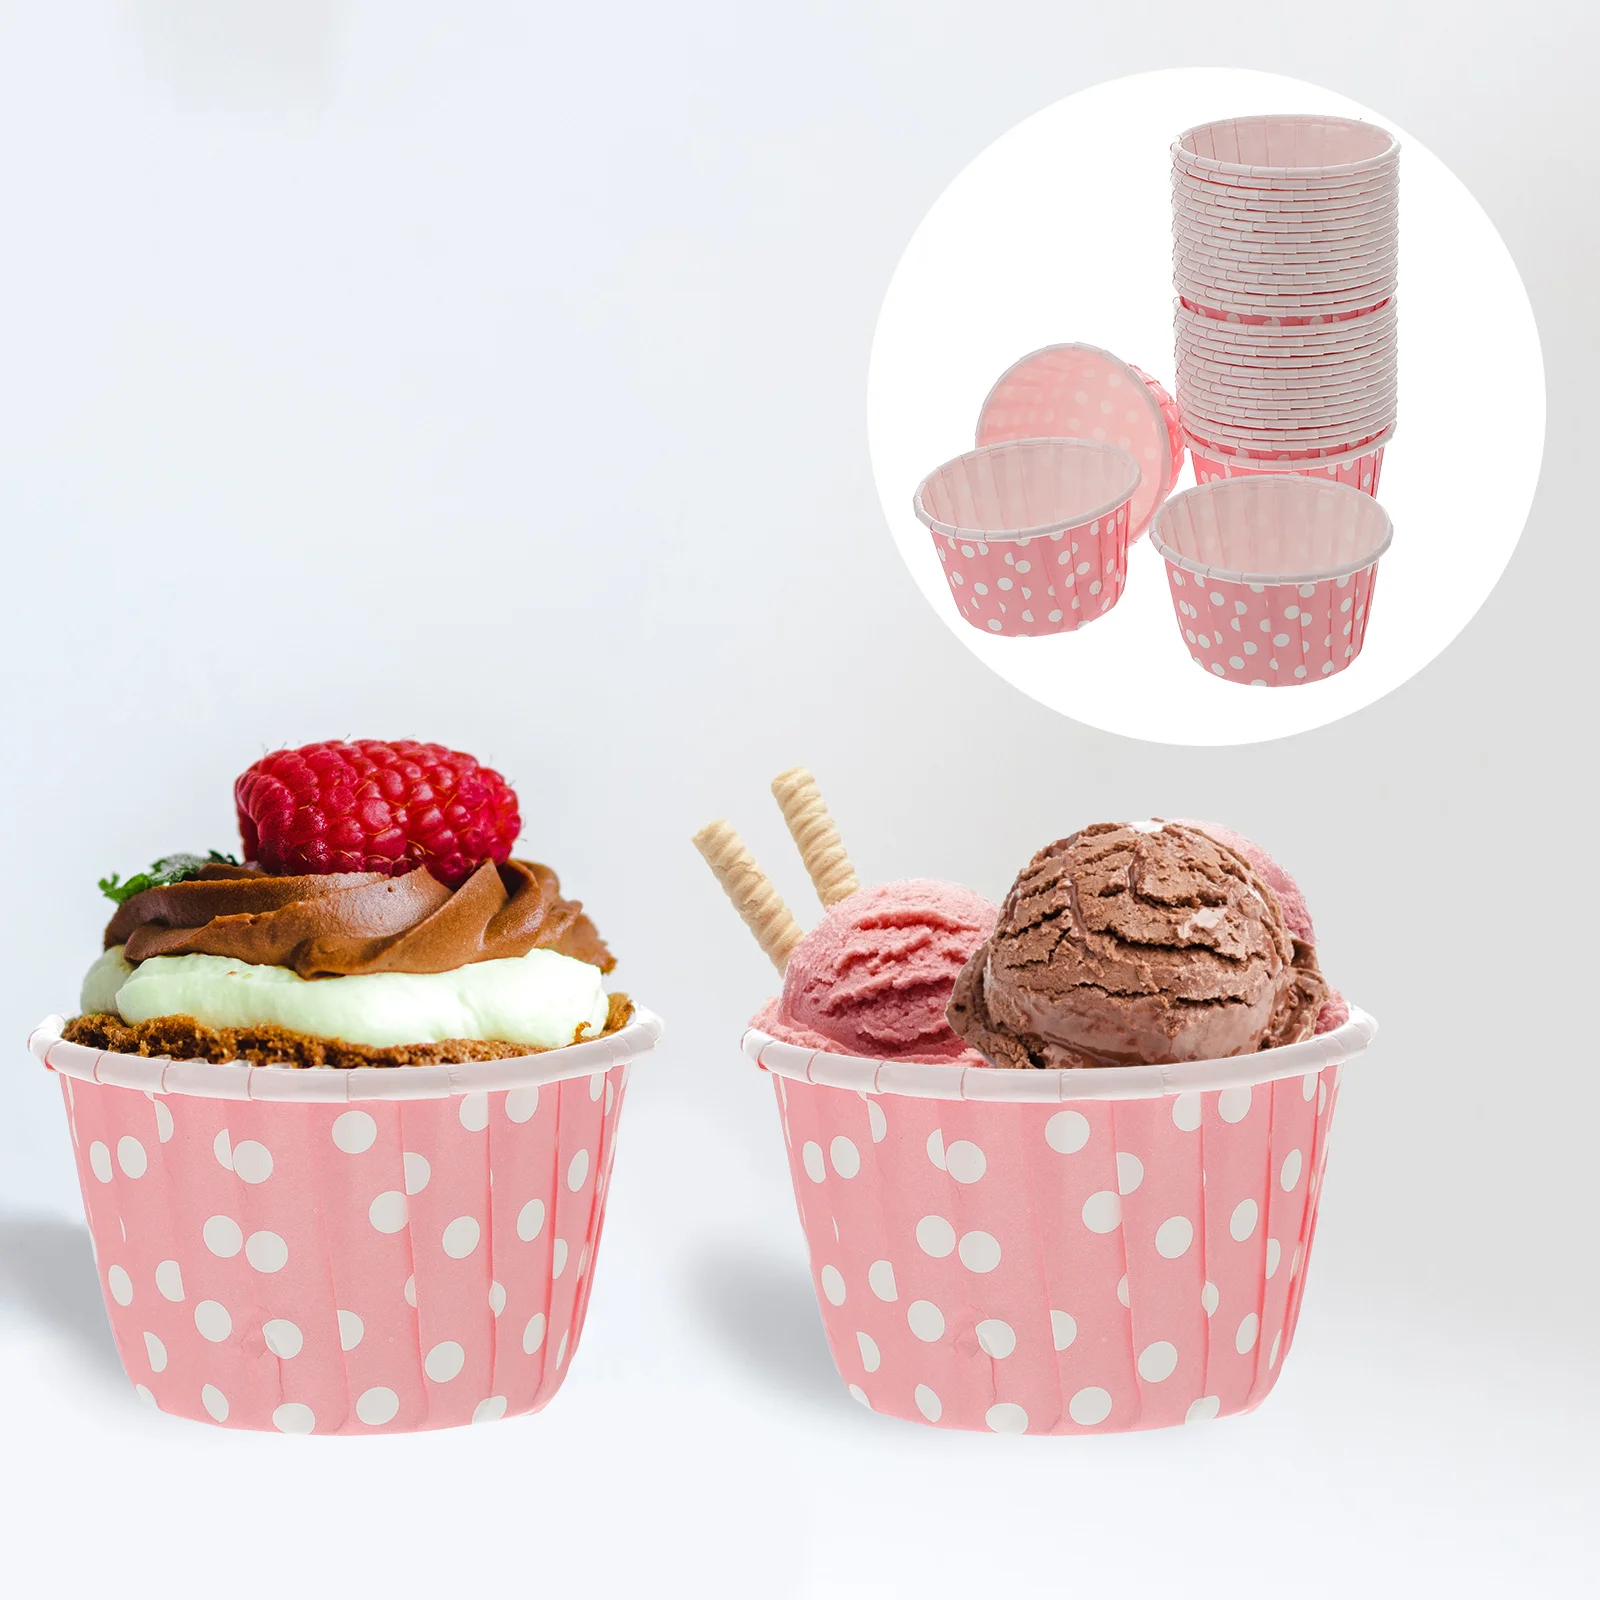 

Cups Paper Cup Ice Cream Bowls Dessert Sundae Disposable Yogurt Bowl Cupcake Container Pudding Jelly Muffin Cases Liners Party